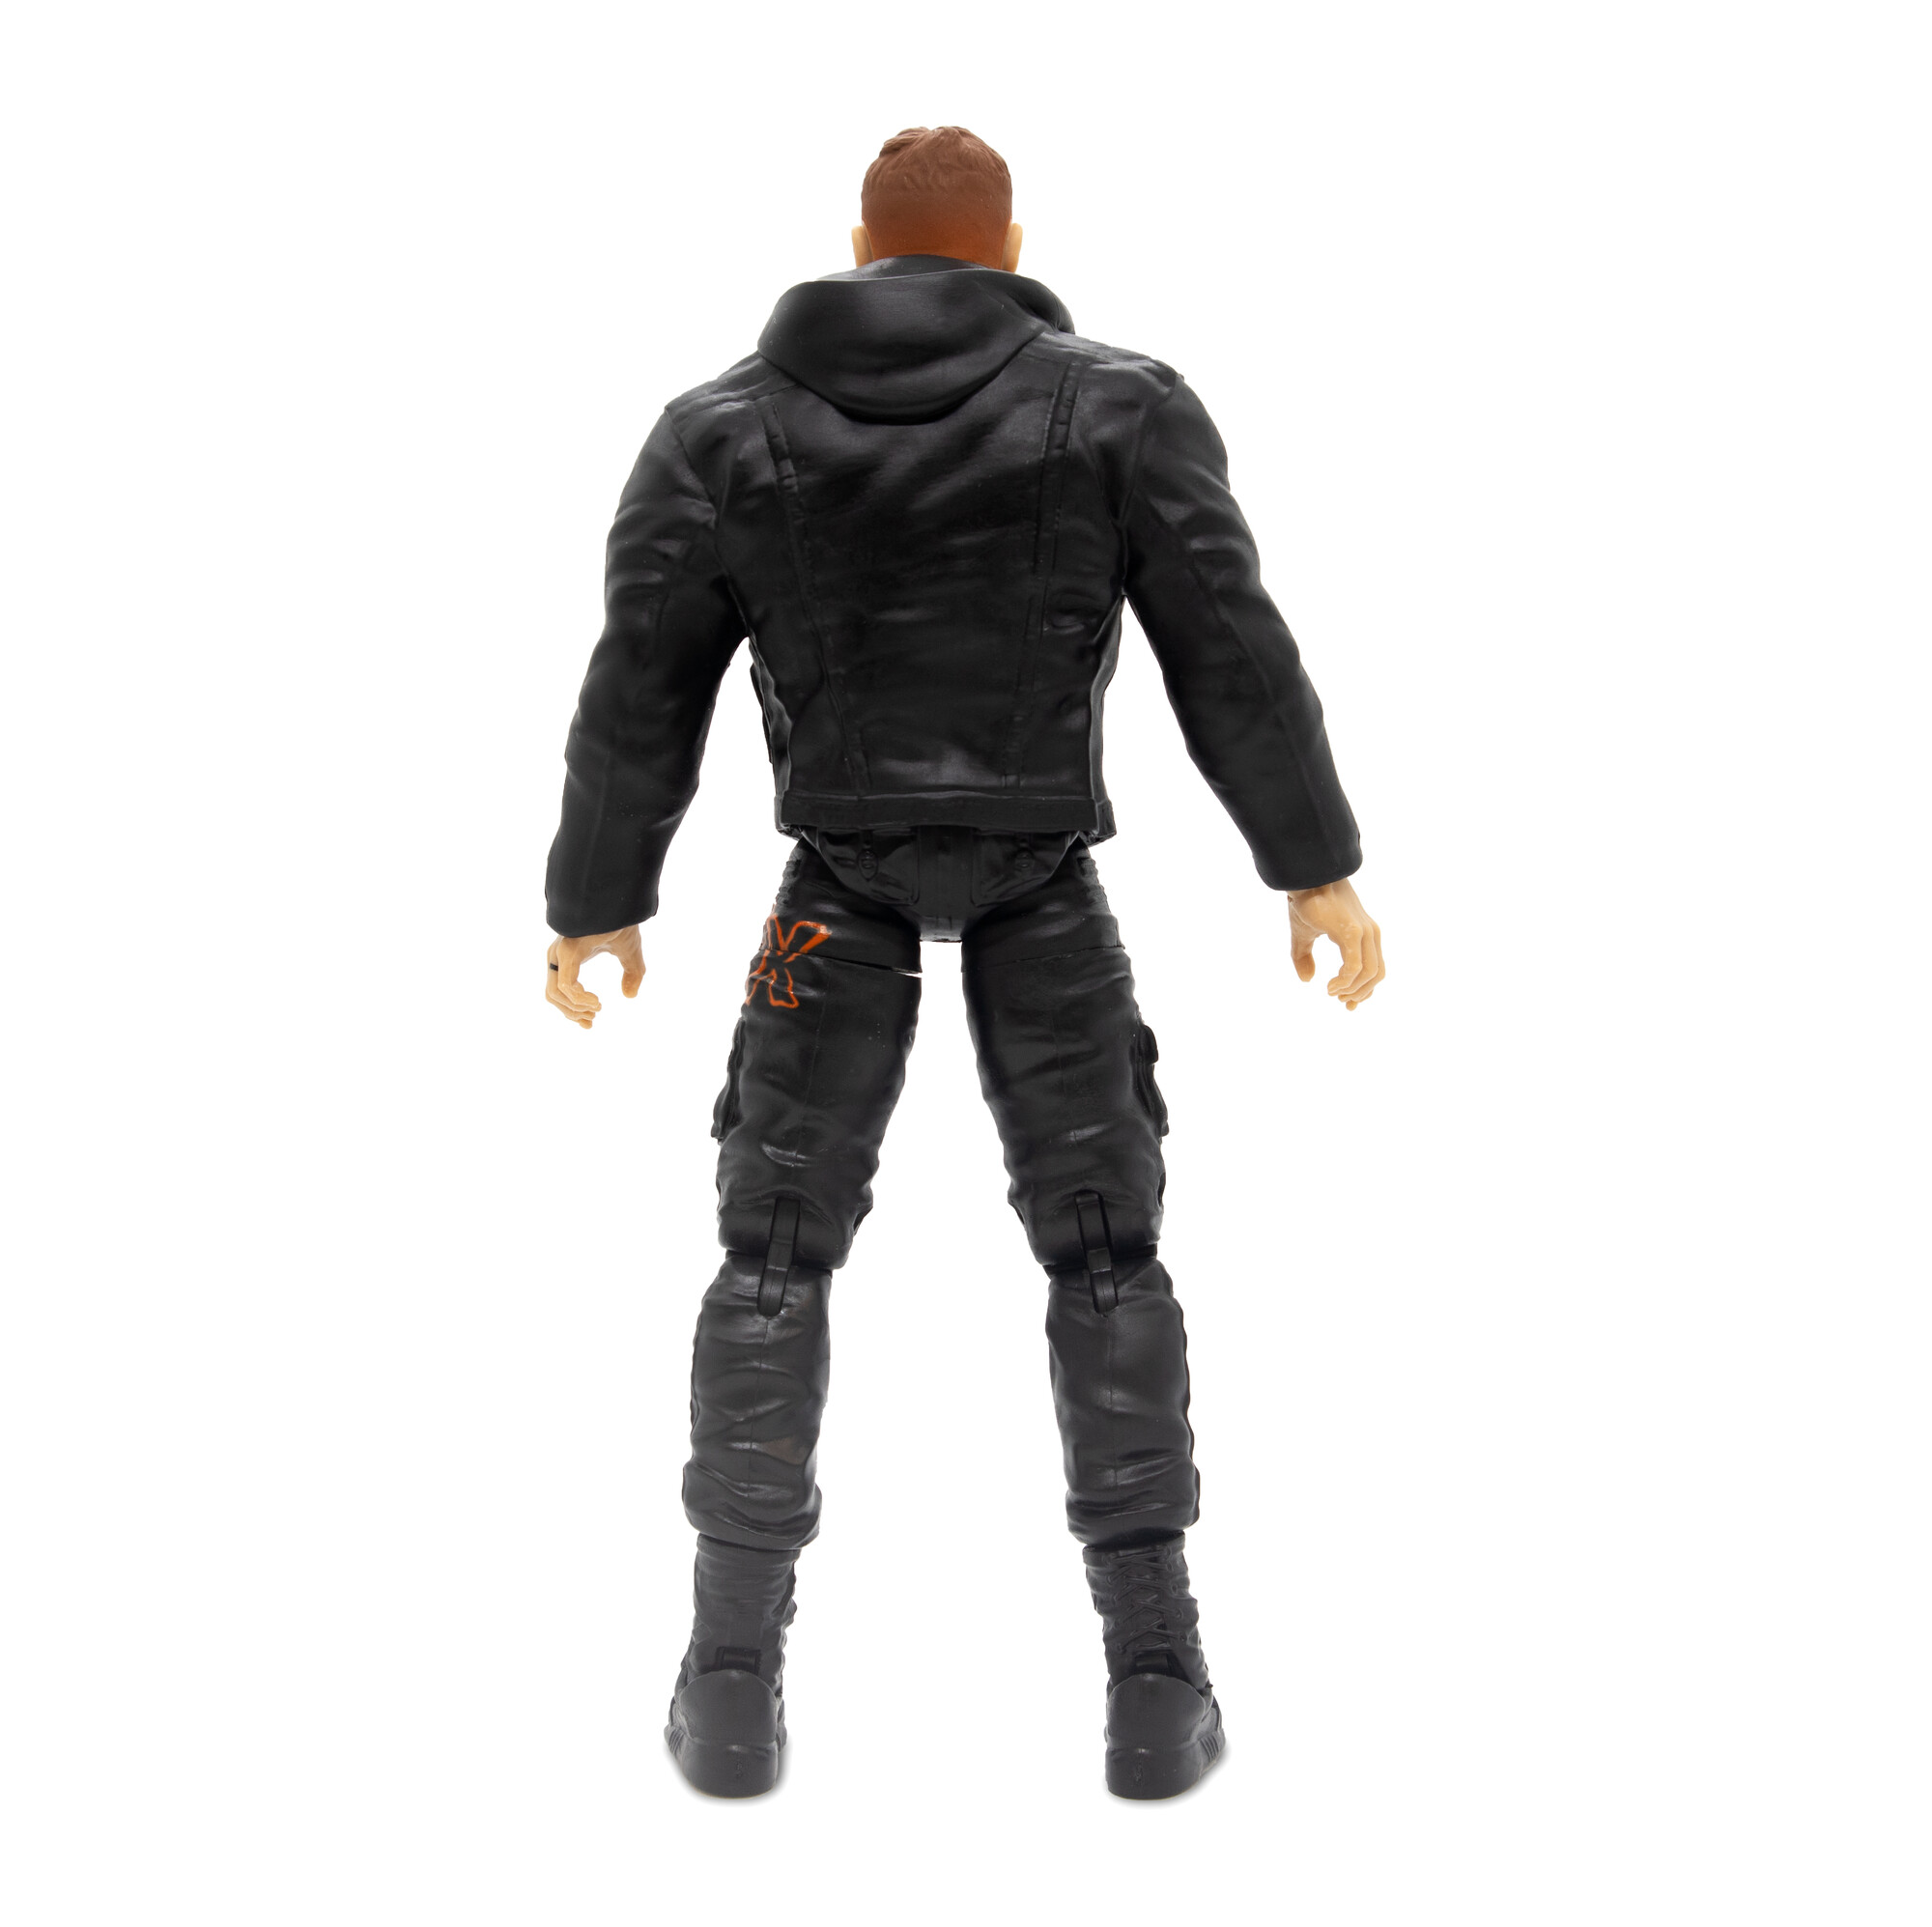 AEW All Elite Wrestling Unrivaled Collection Series 8 Jon Moxley Action Figure - image 3 of 5